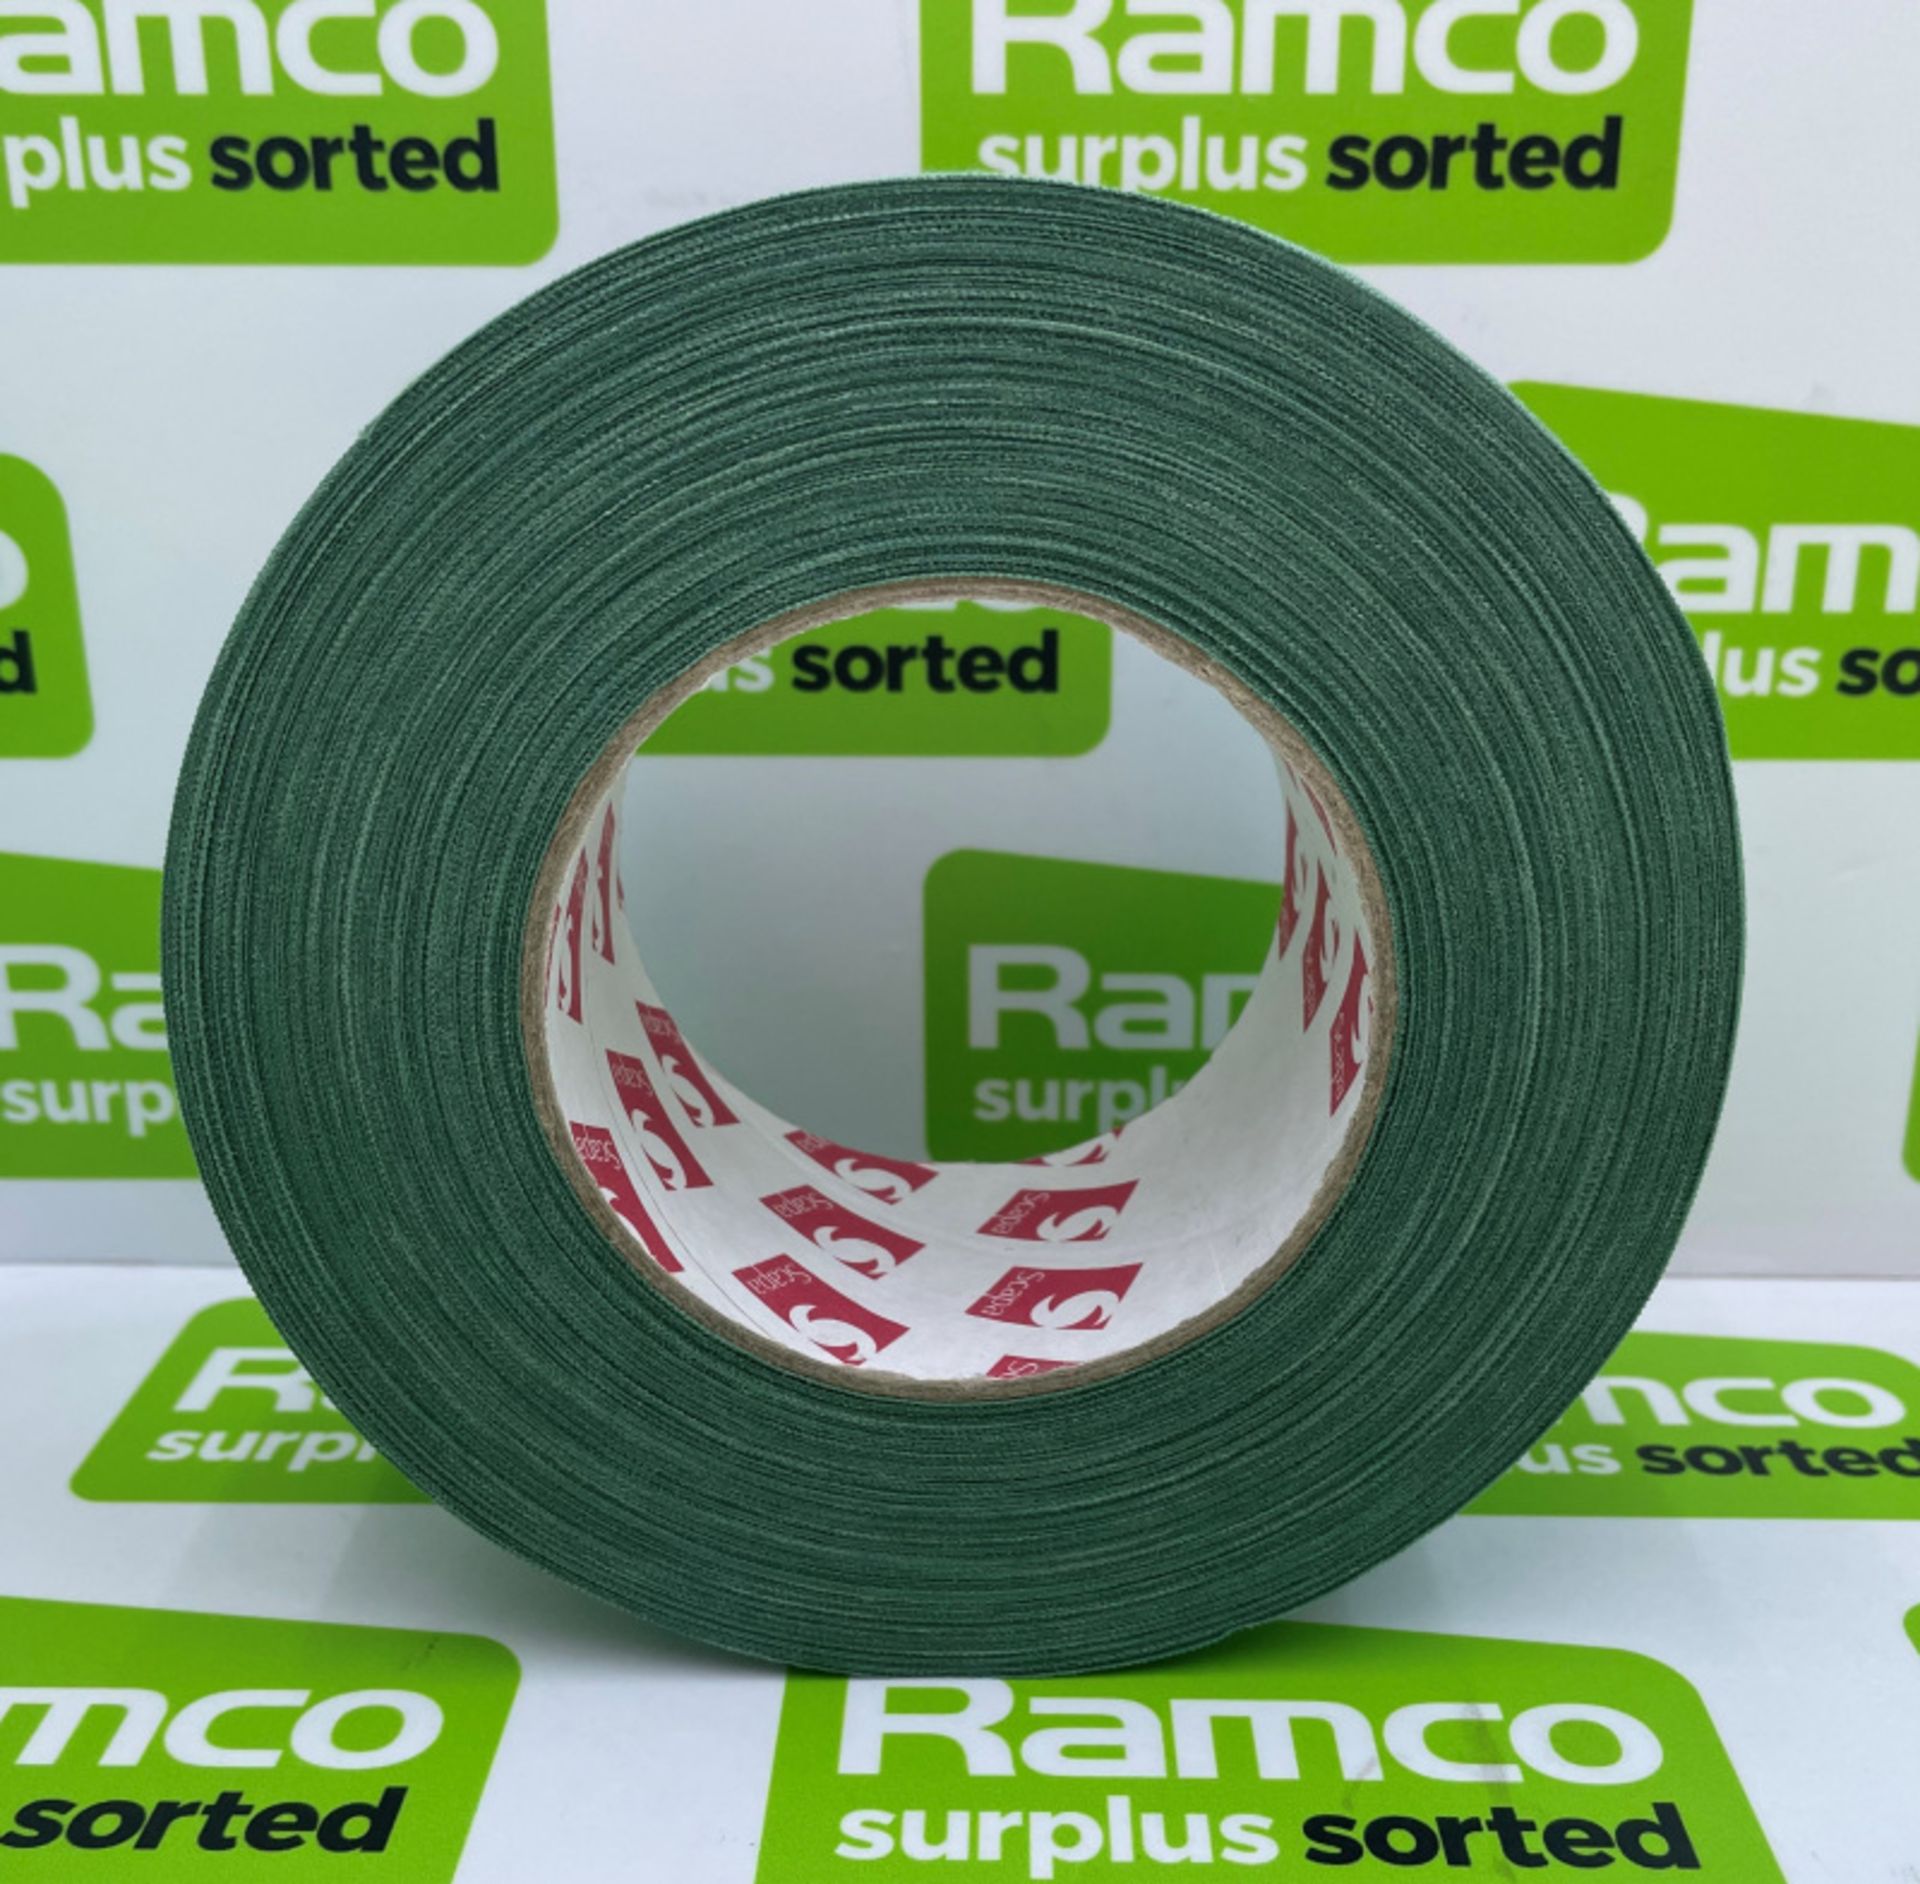 Scapa 3302 Pro Tape - Olive Green - 50mm x 50M rolls - 16 rolls per box - 31 boxes - Image 3 of 5